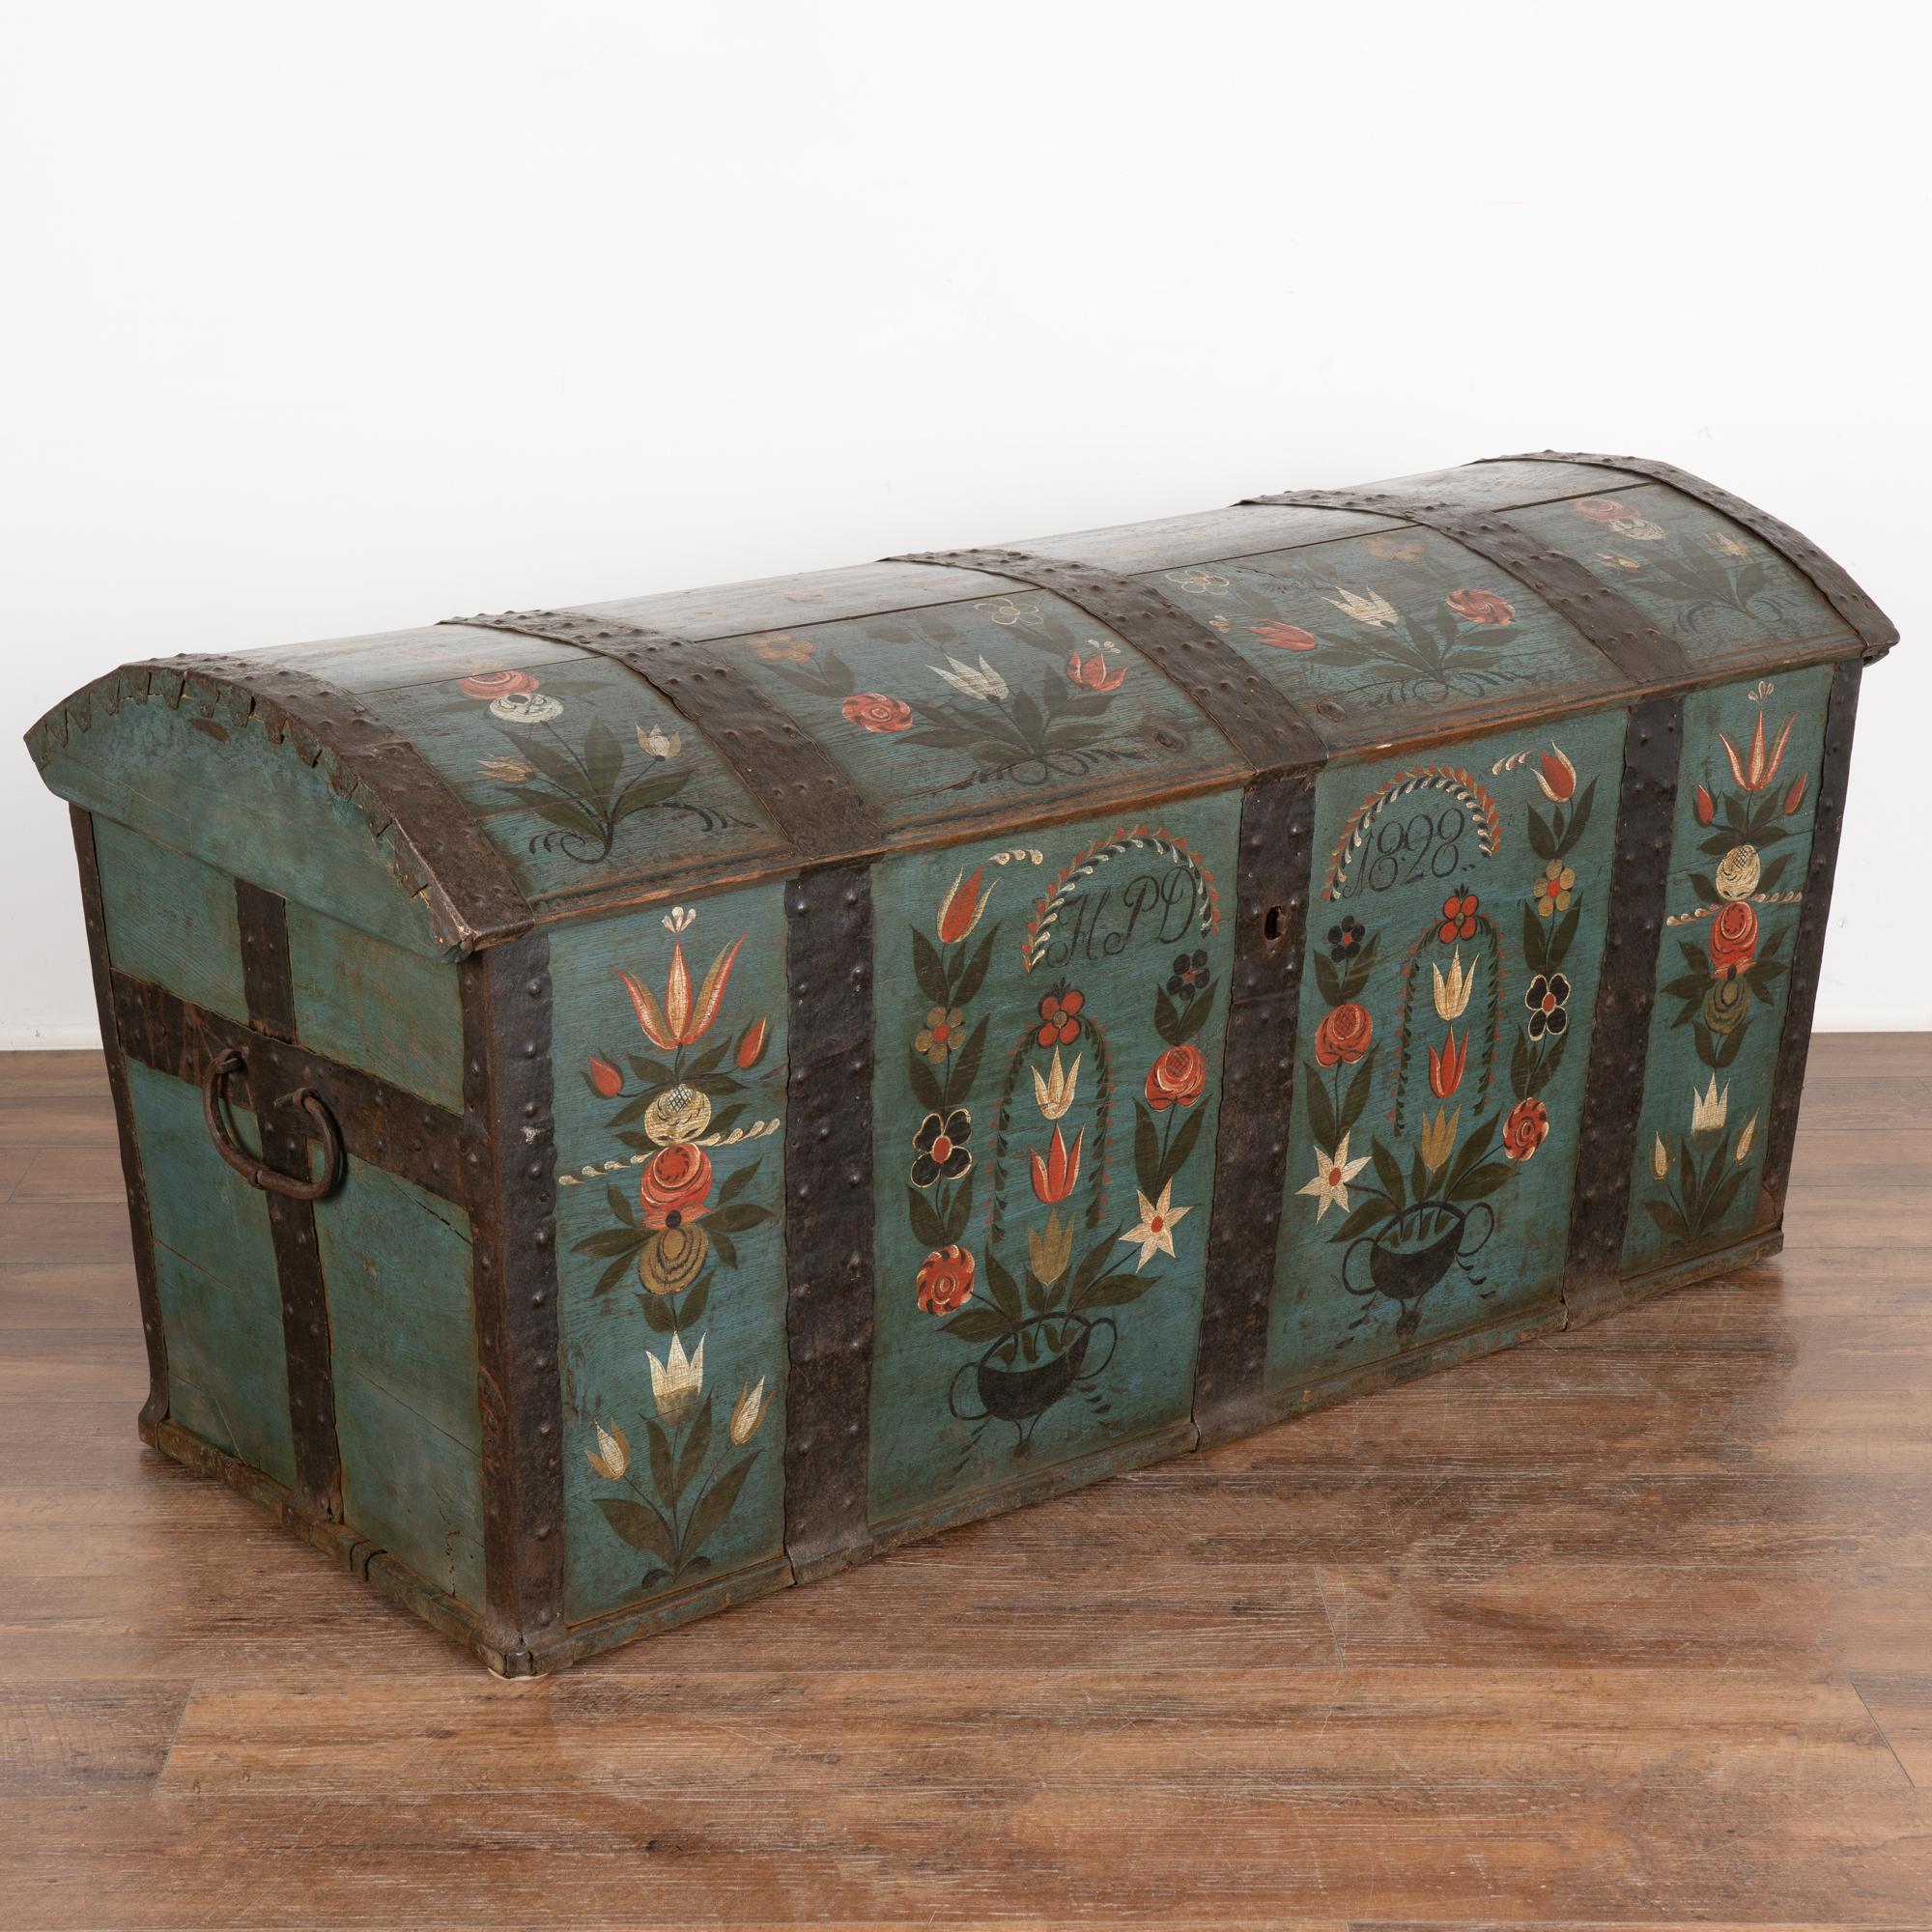 Original blue painted dome top oak trunk from Sweden with traditional hand-painted details include floral motif along top and front.
Monogram of HPD and date 